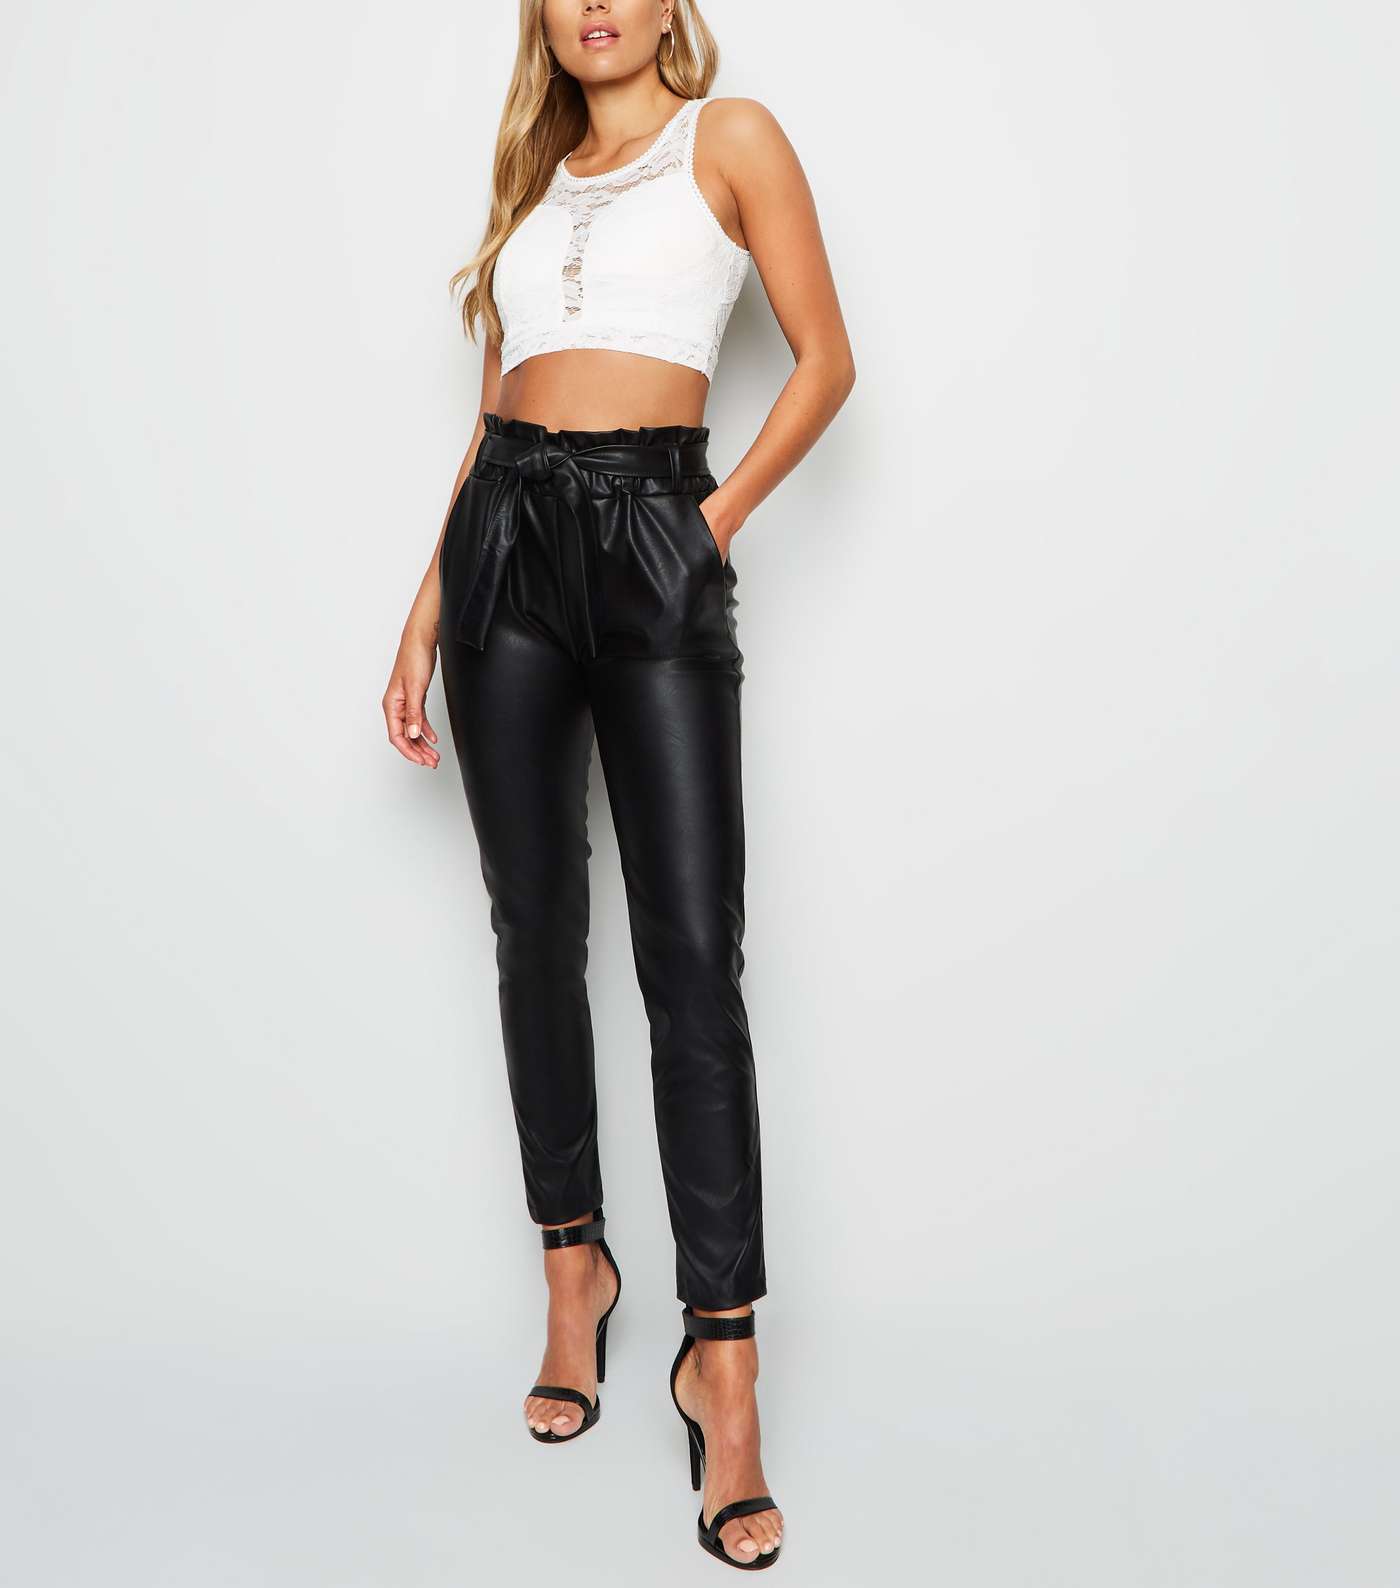 Cameo Rose Black Leather-Look High Waist Trousers